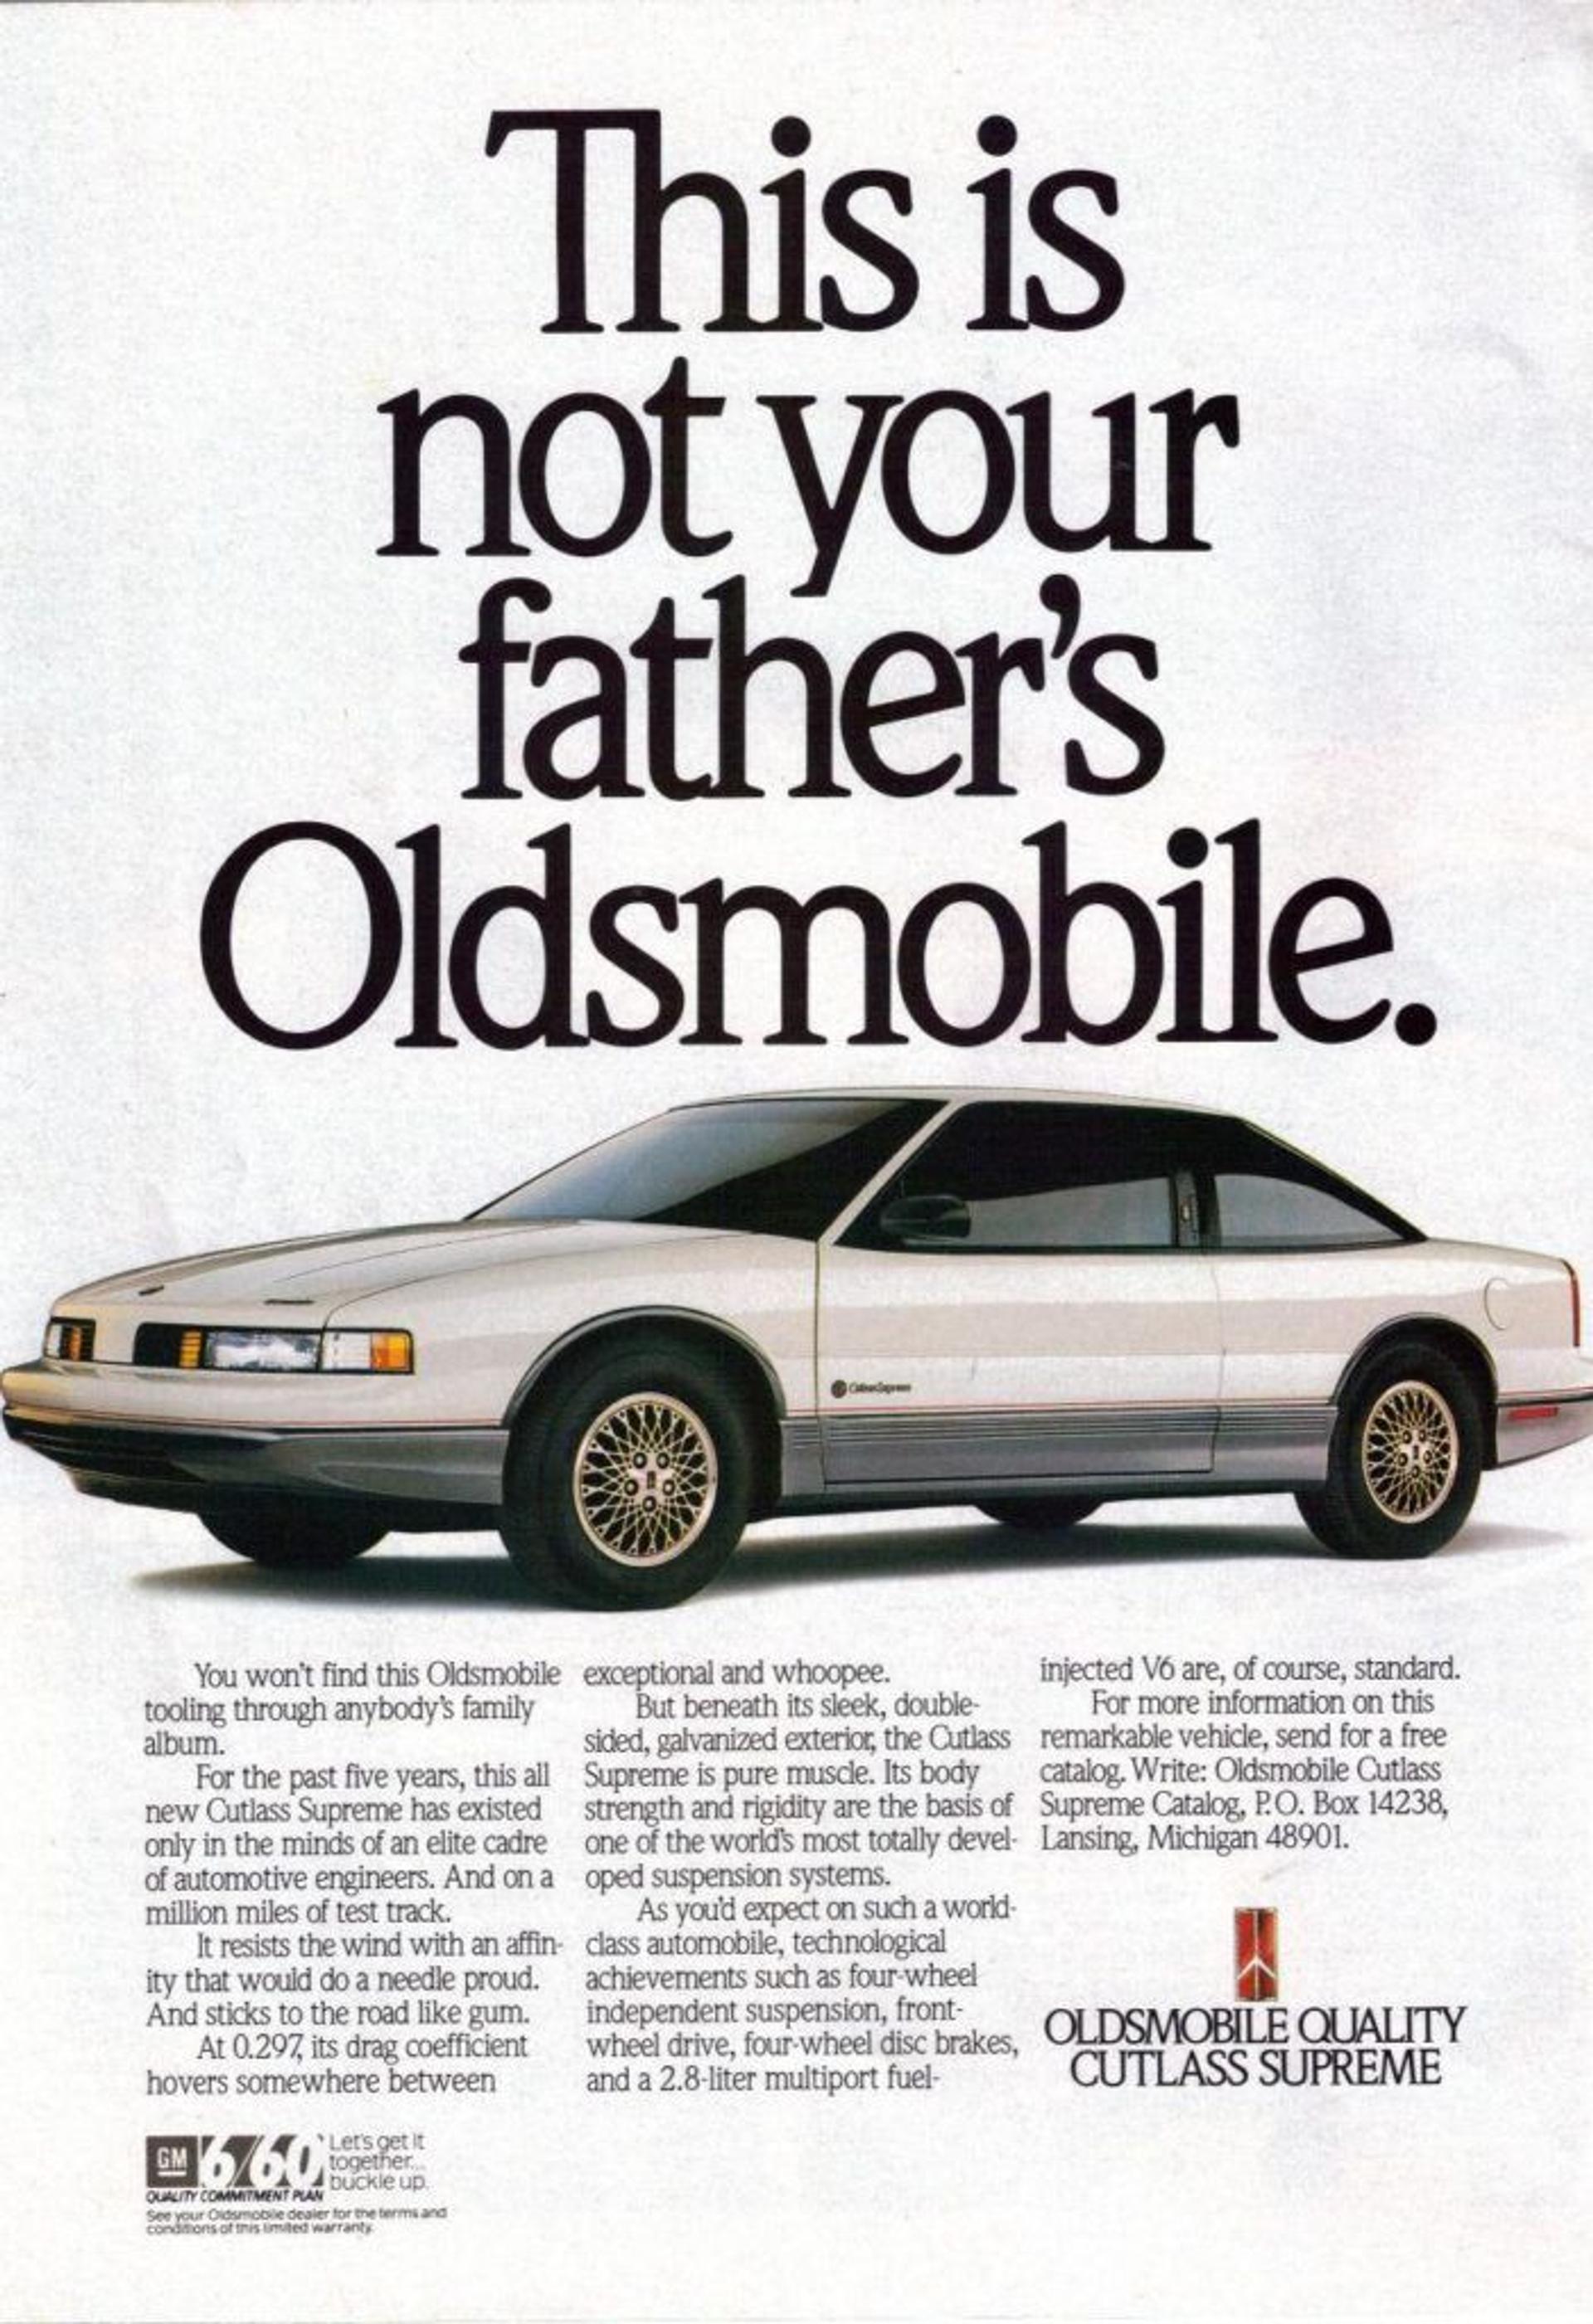 Not-Your-Fathers-Oldsmobile.jpeg